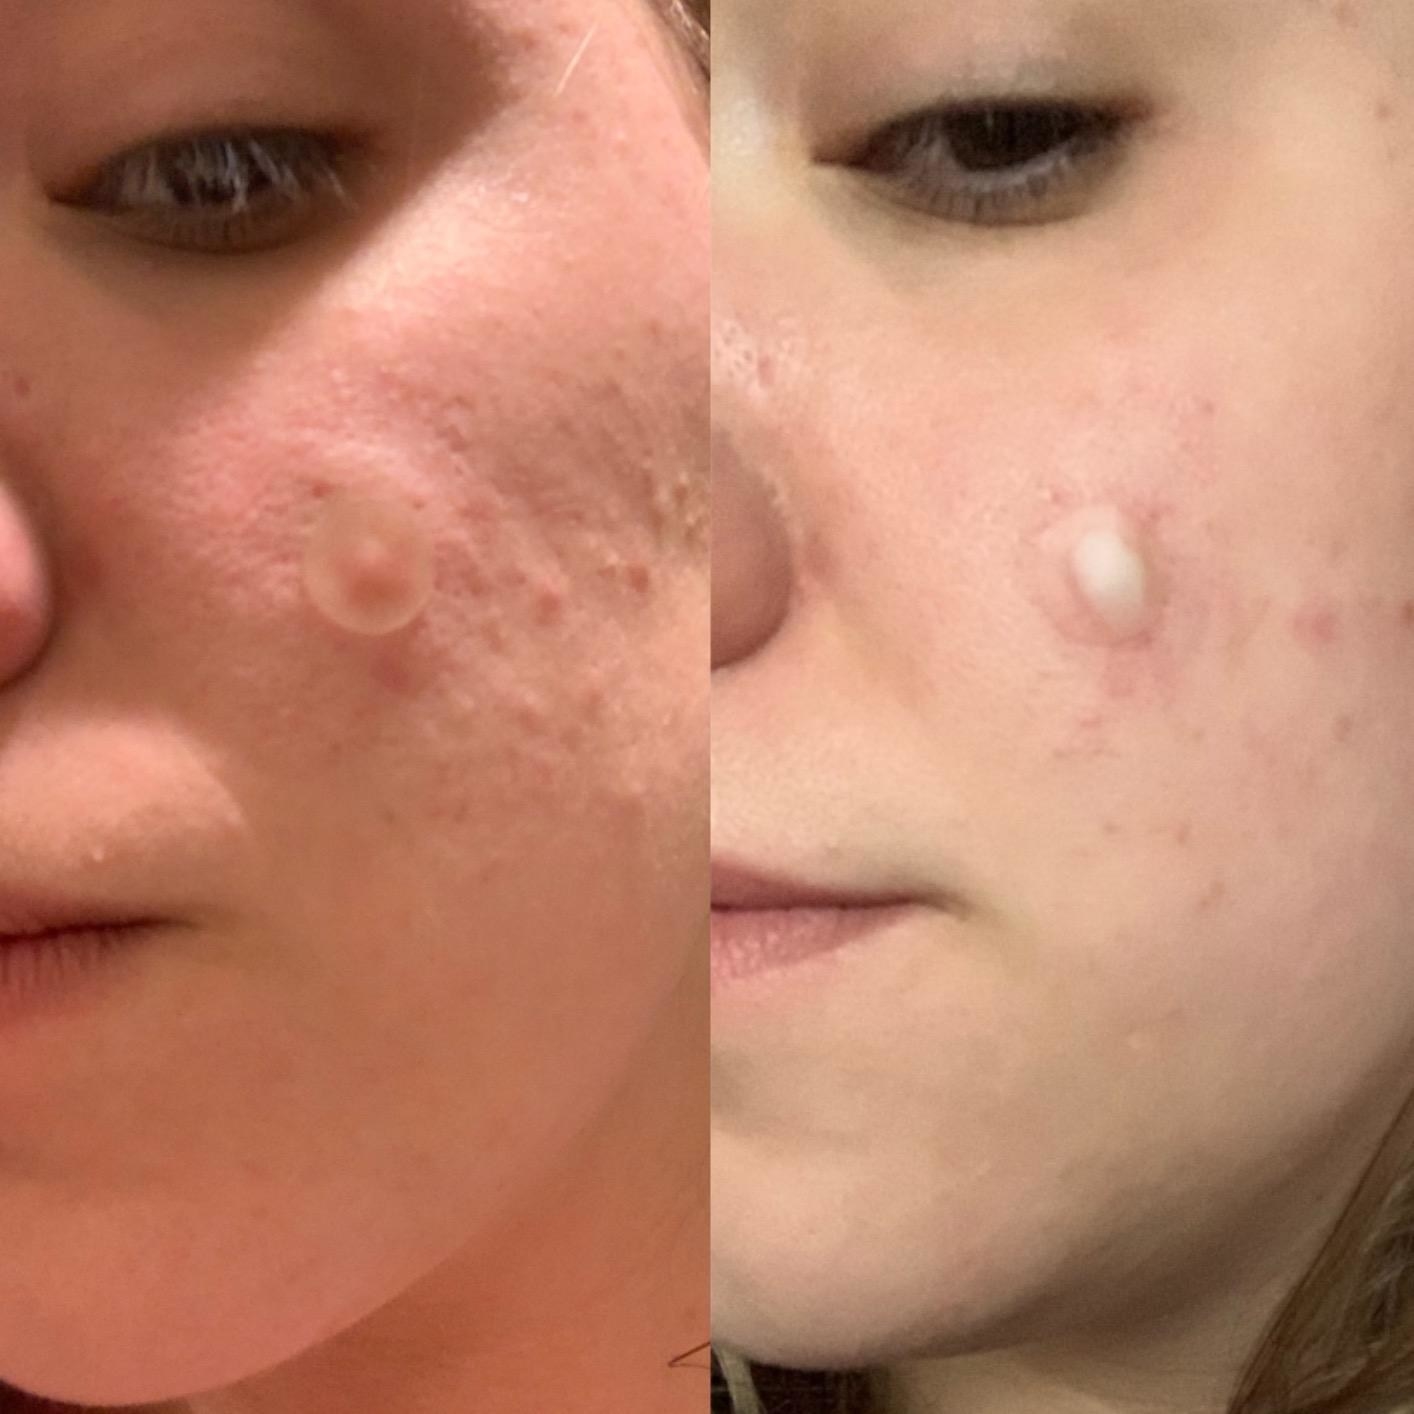 on the left, reviewer places a Mighty Patch on their face. on the right, same reviewer shows Mighty Patch lifting puss out of acne spot on their face